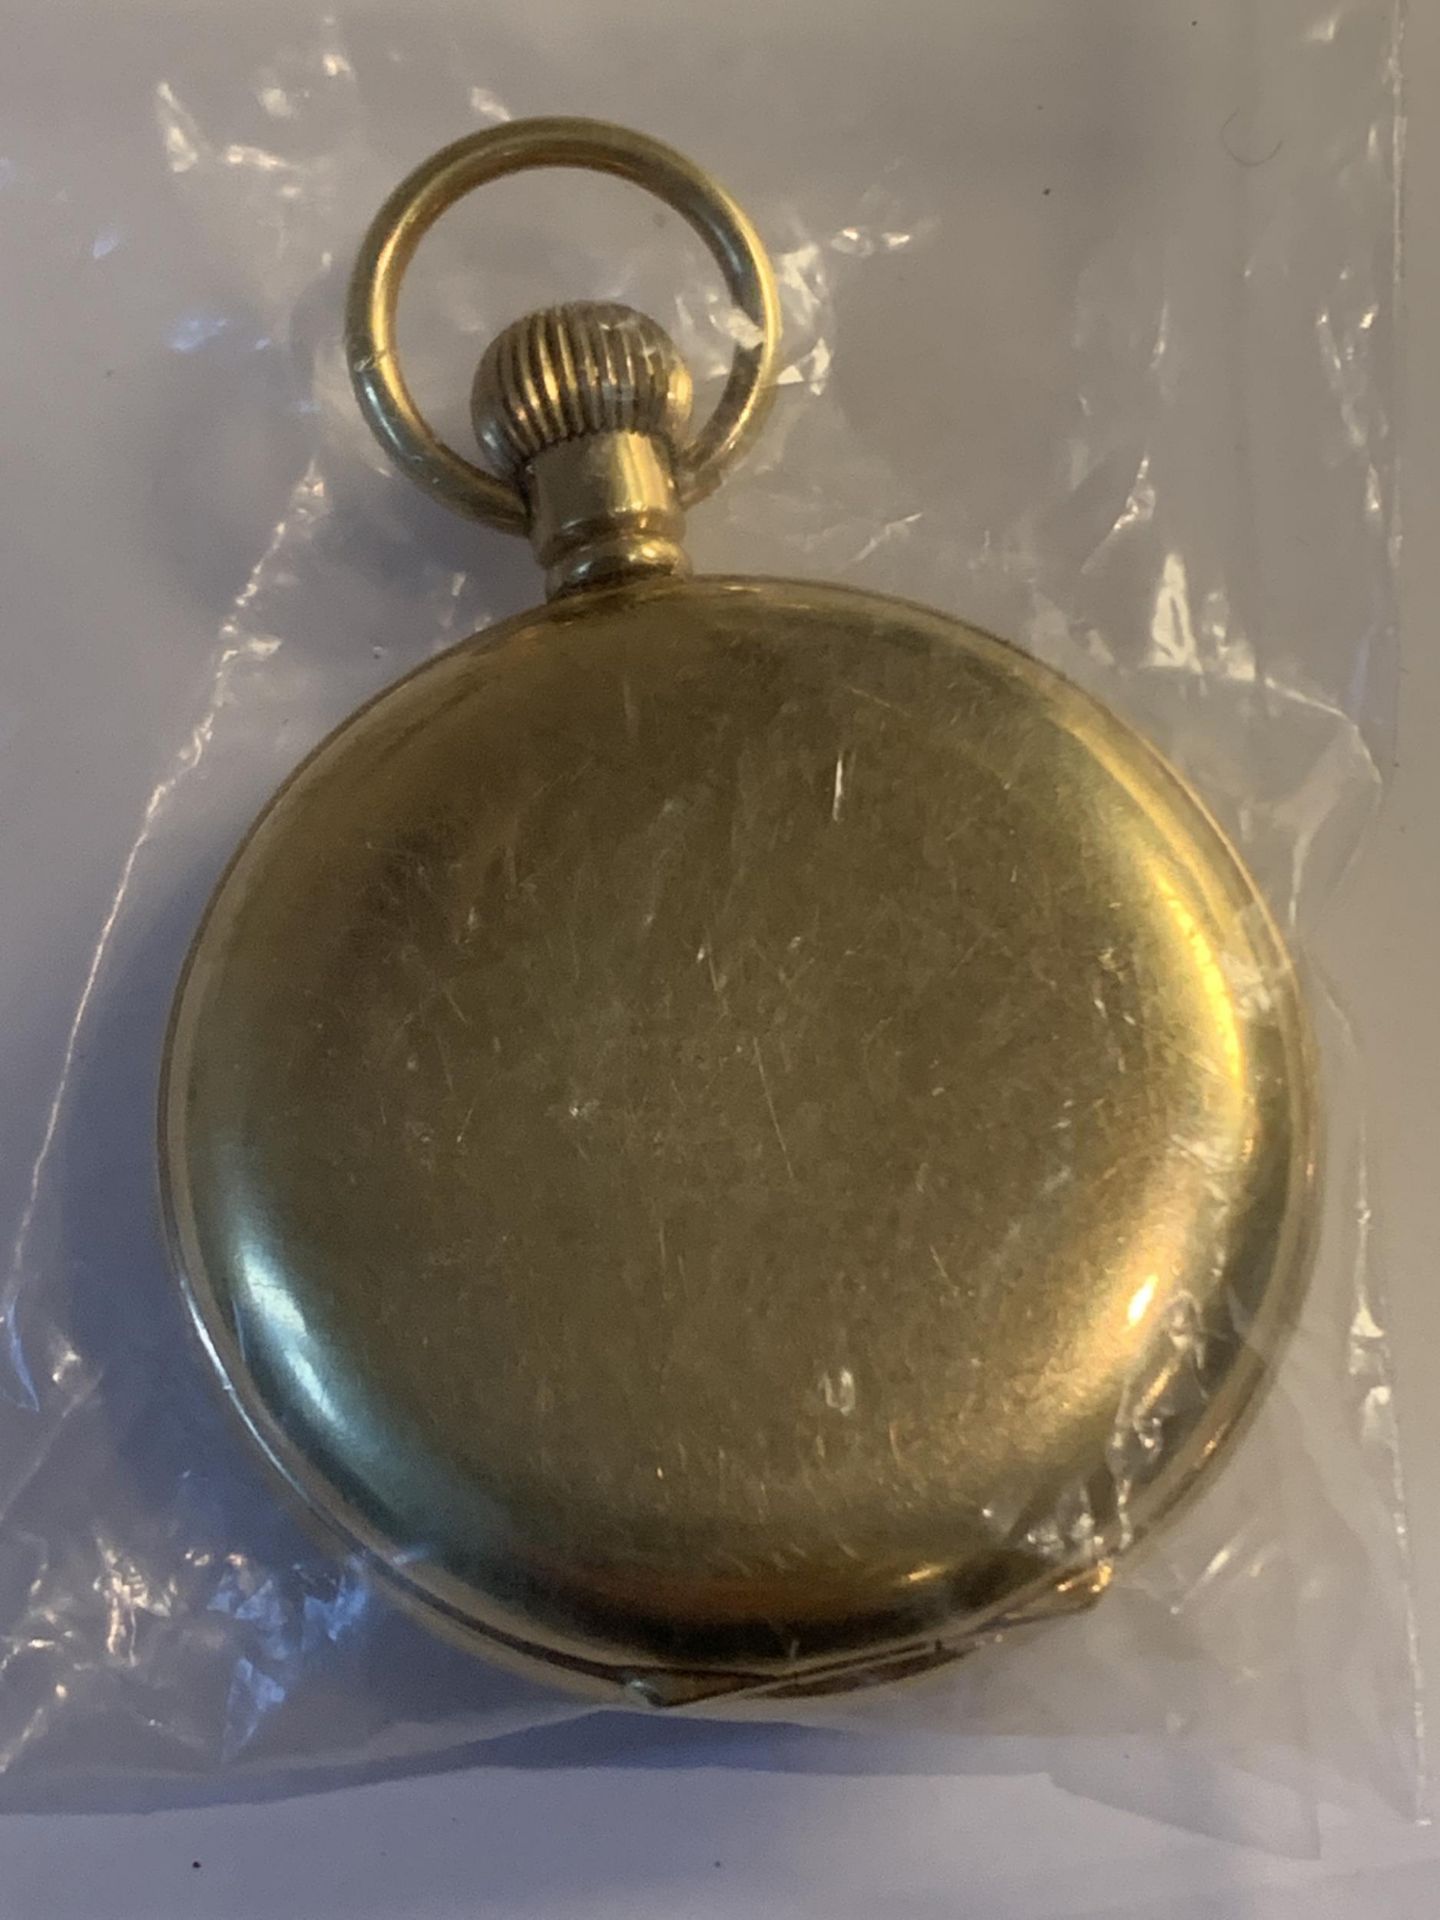 A GOLD PLATED VERTEX REVUE POCKET WATCH SEEN WORKING BUT NO WARRANTY - Image 3 of 3